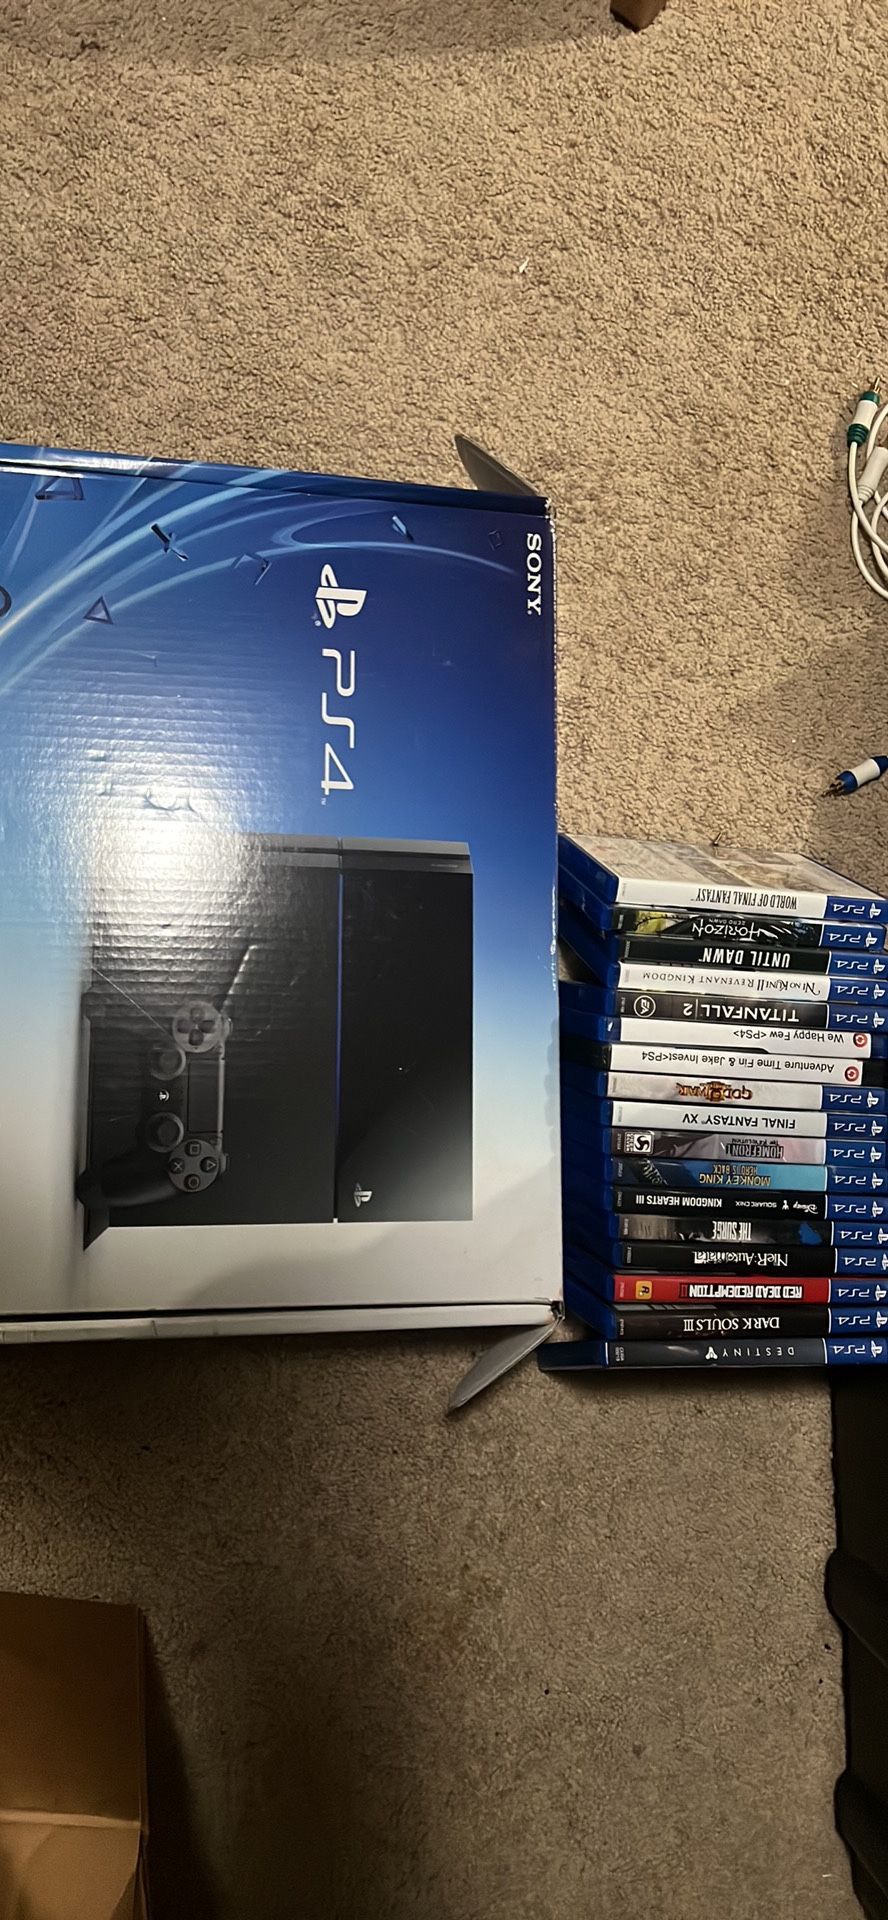 Ps4 In Box With Games